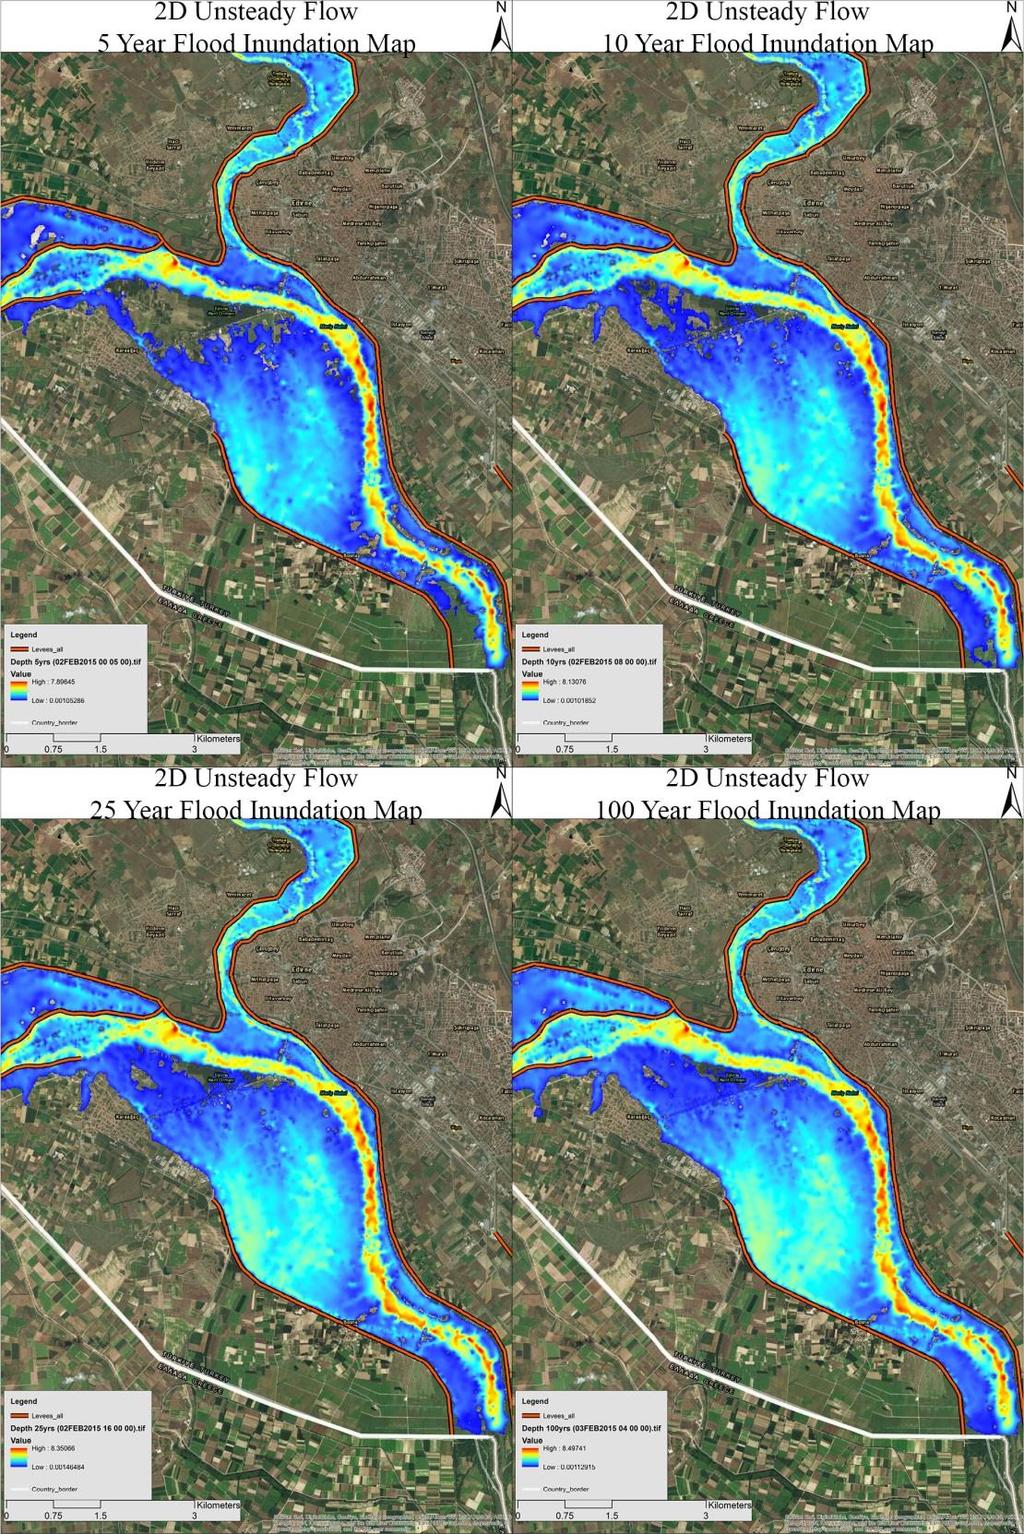 Figure 2D Unsteady Flow Inundation Maps of Floods with Different Return Periods (With Levees).